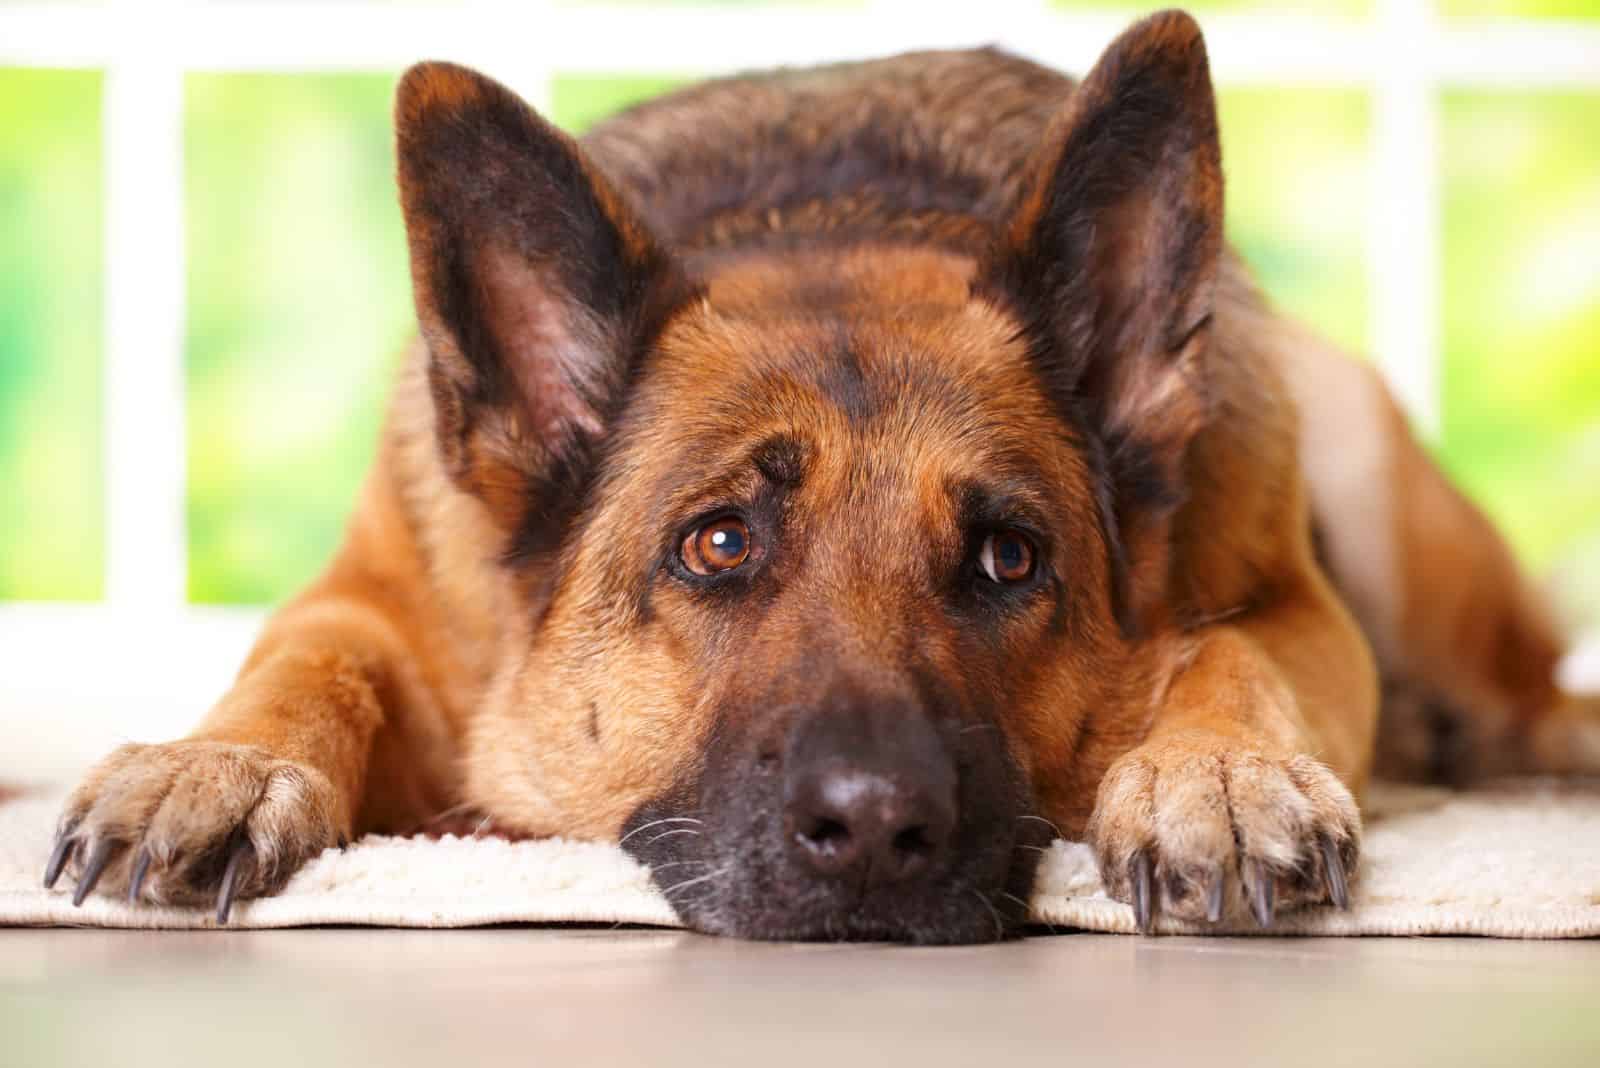 German shepherd dog looking aside and laying on the floor